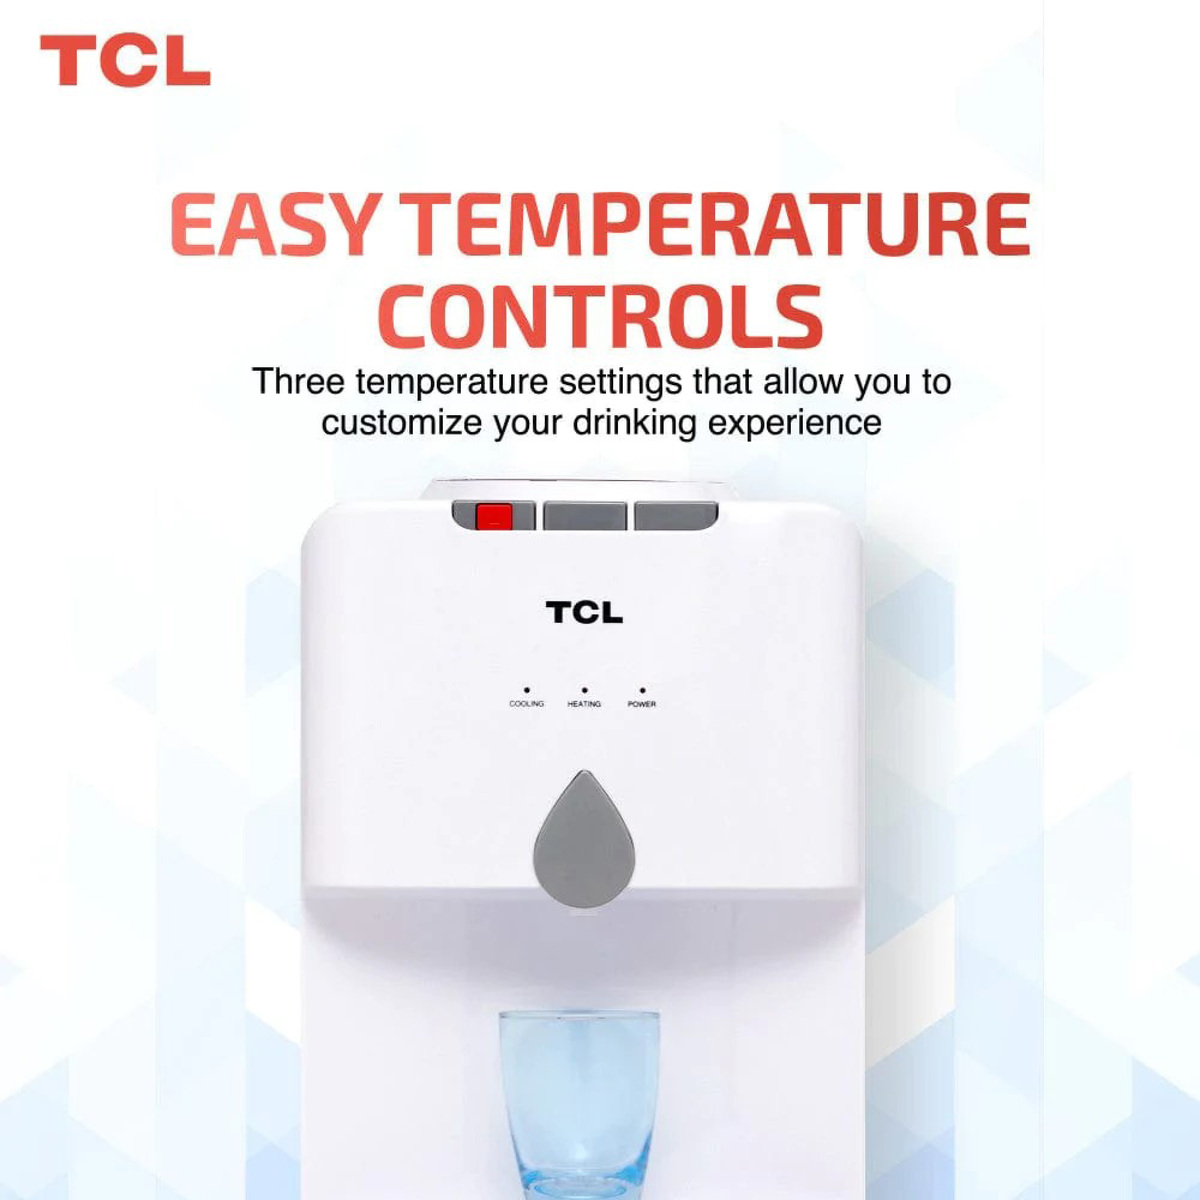 TCL Top Loading 3 Tap Water Dispenser, White, TY-LWYR19W